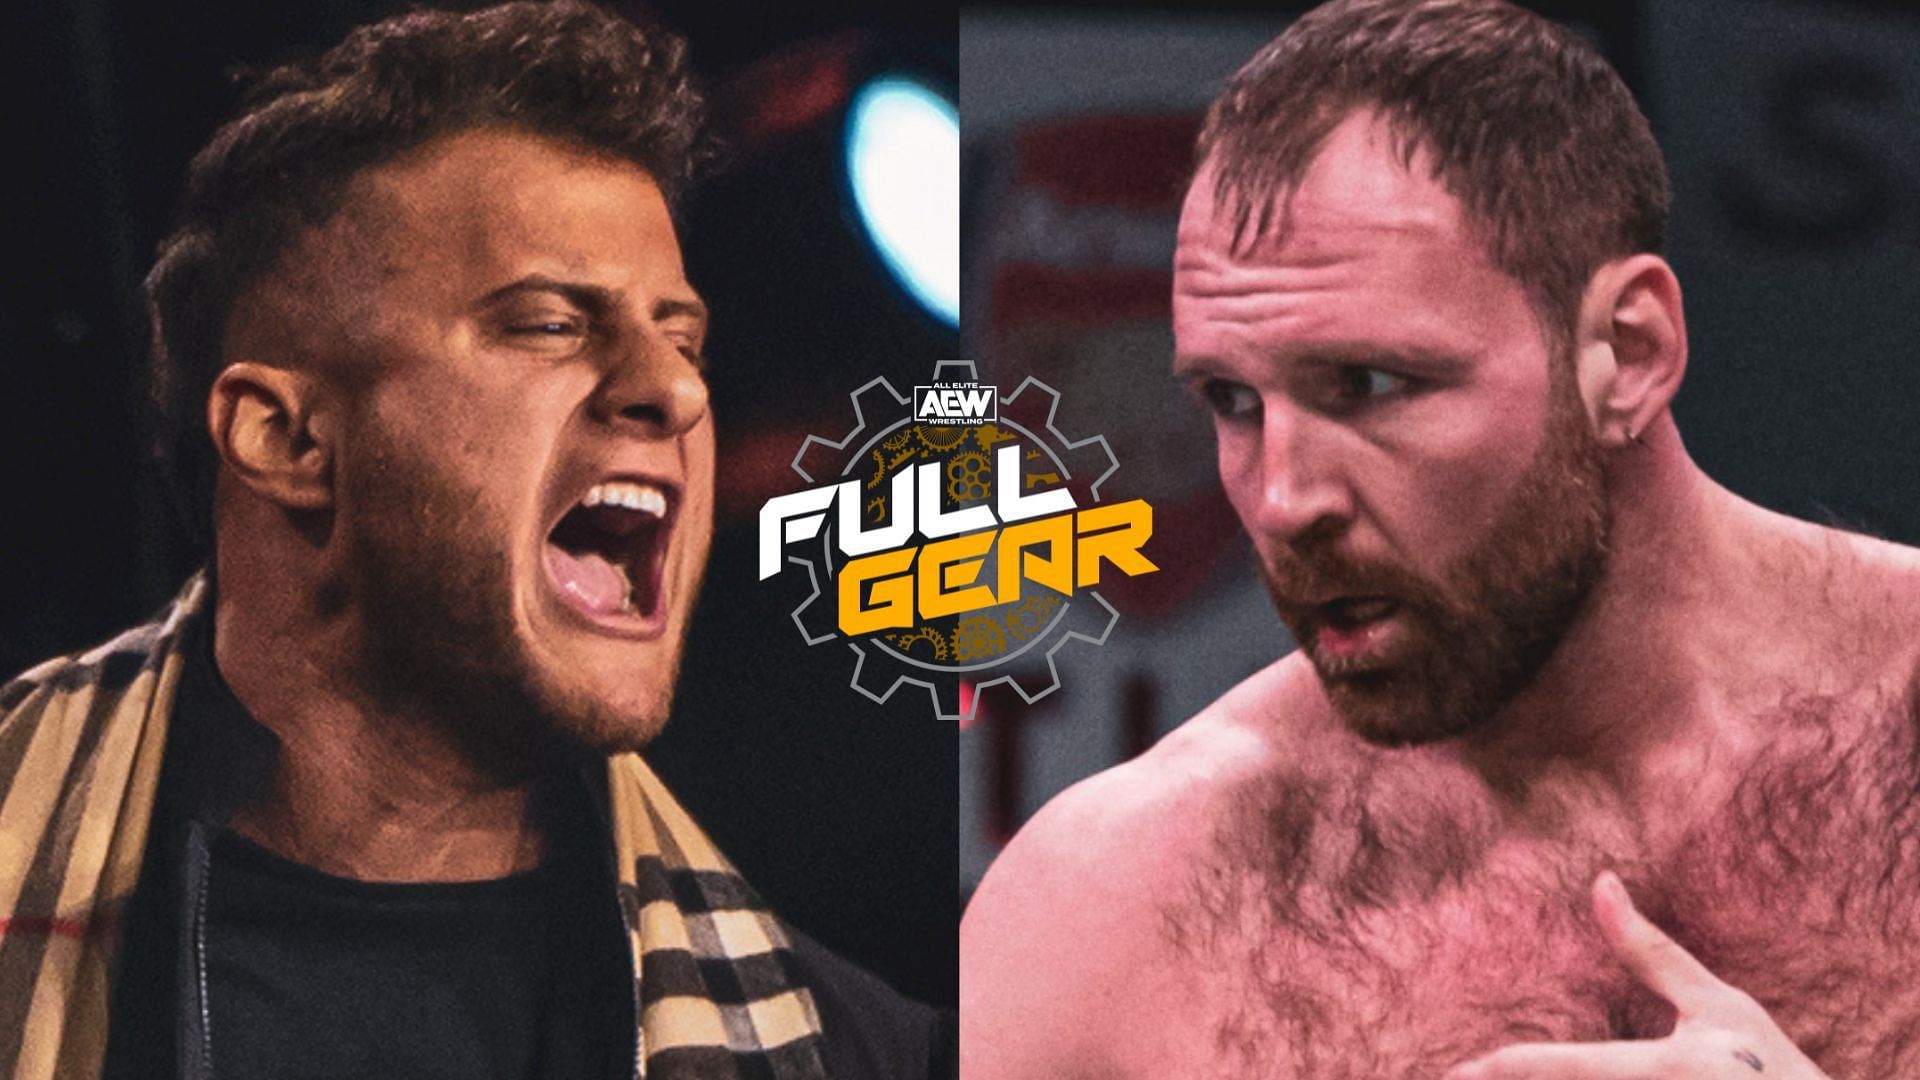 Jon Moxley and MJF will fight for the AEW World Championship at Full Gear